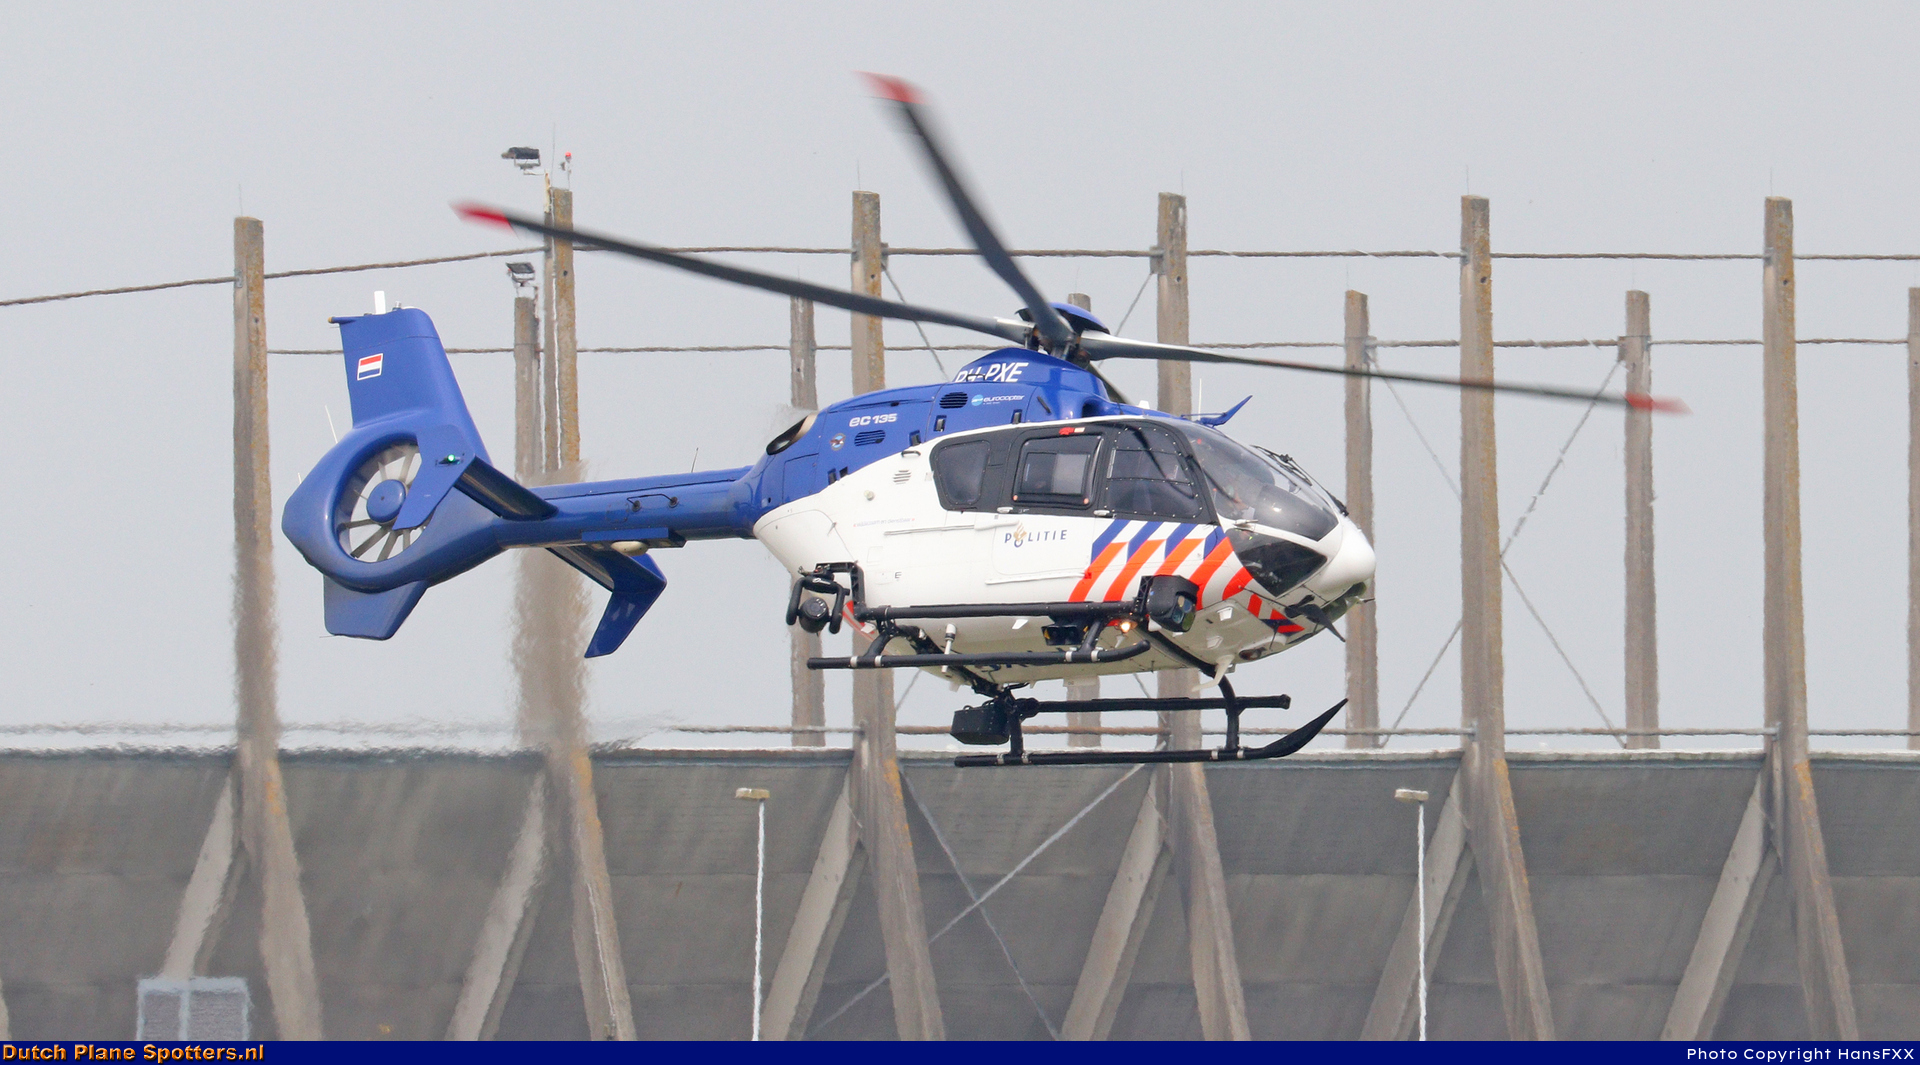 PH-PXE Eurocopter EC-135 Netherlands Police by HansFXX